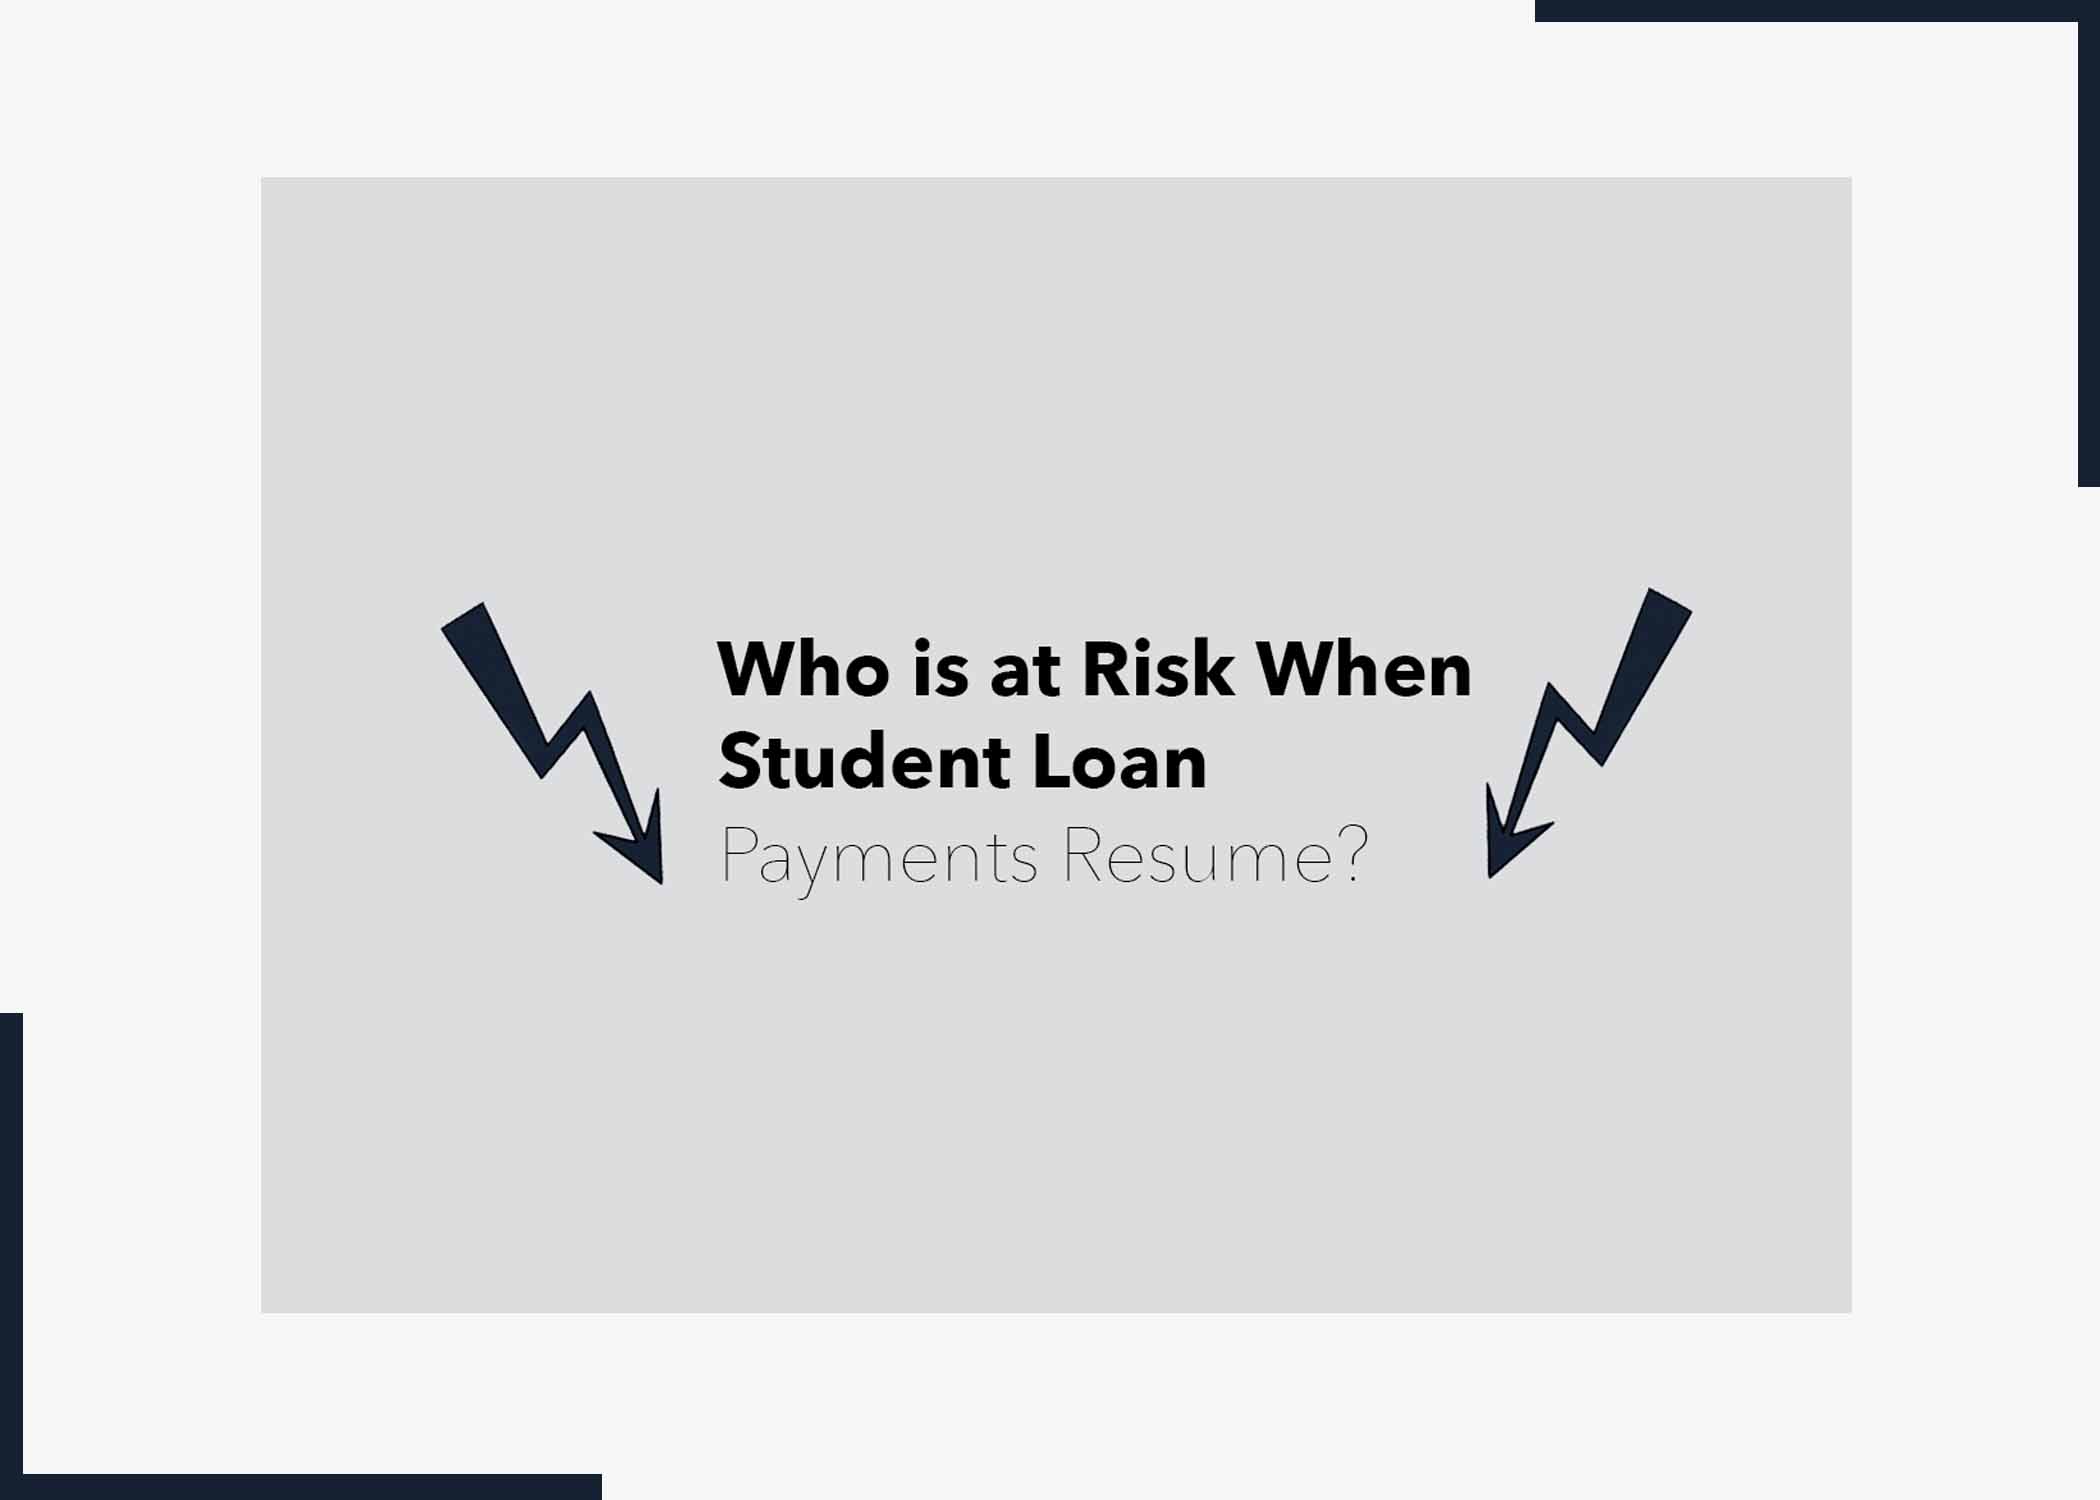 Who is at Risk When Student Loan Payments Resume?